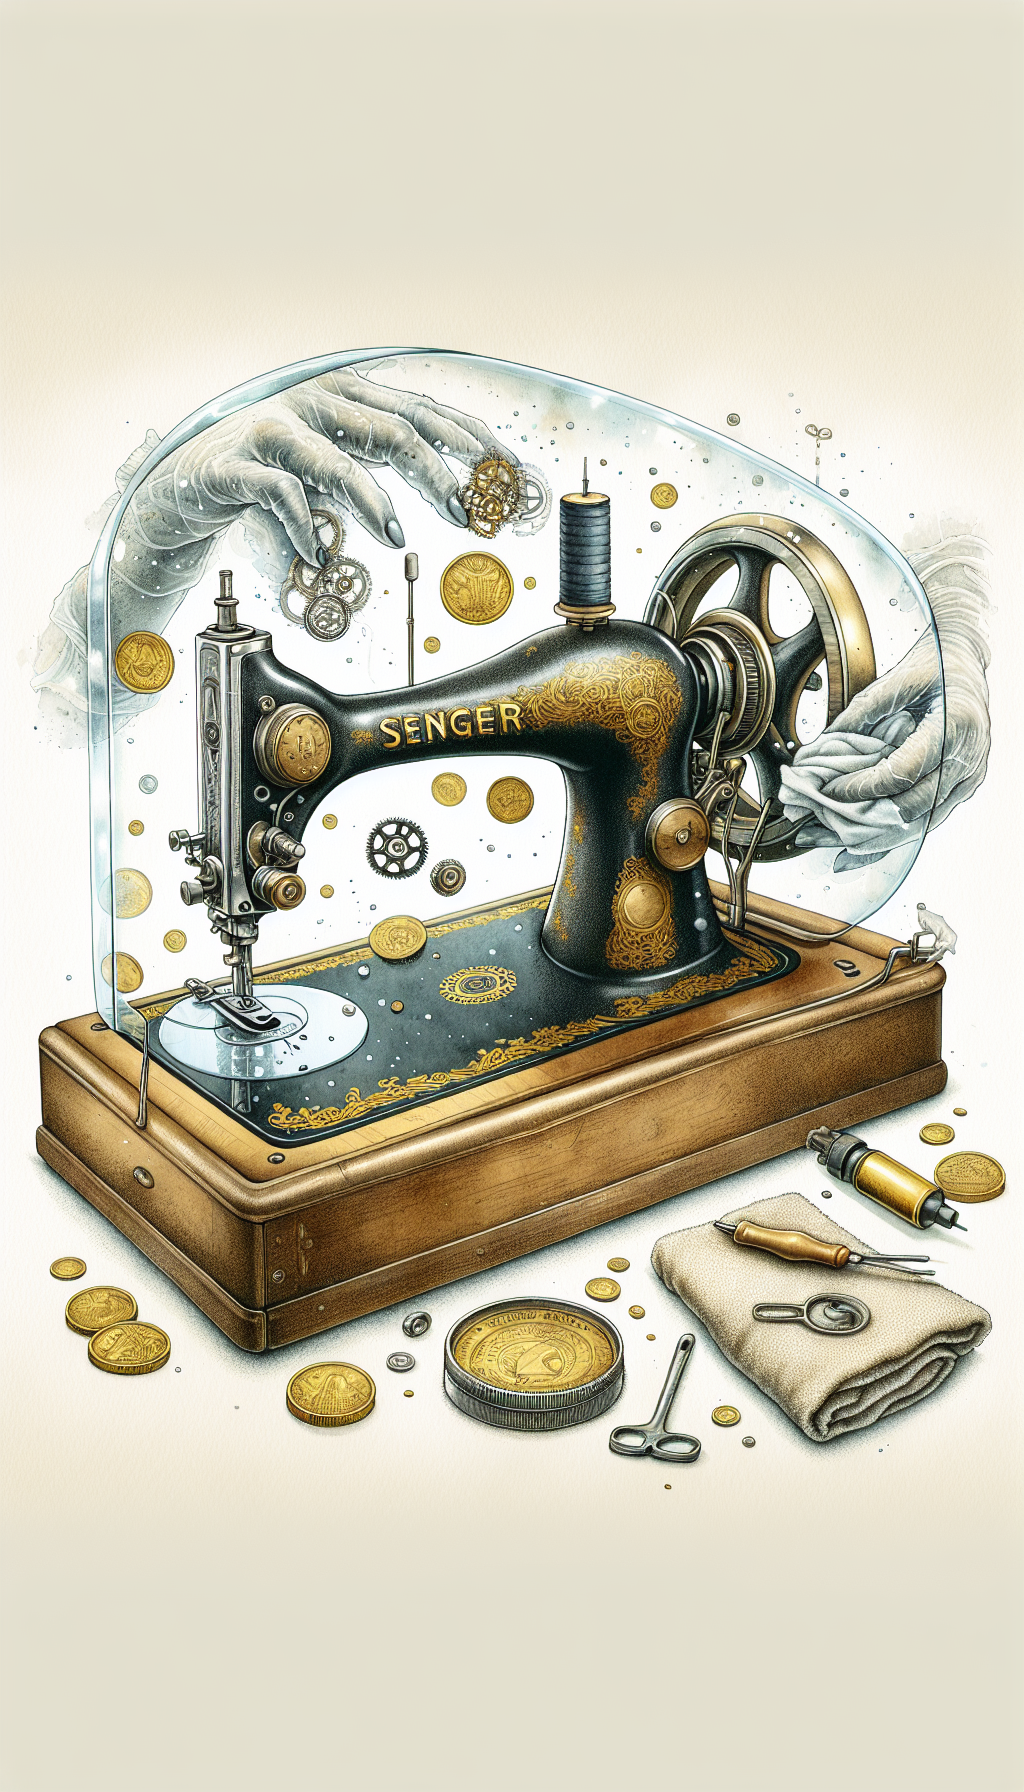 An illustration of a gleaming antique Singer sewing machine enshrined in a glass case, with ethereal hands gently dusting and oiling its gears. Surrounding it are floating golden coins and preservation tools like a soft cloth and oil can, symbolizing the machine's maintained and enhanced value. The image boasts a blend of watercolor textures and sharp, precise line art to capture both its historical elegance and worth.